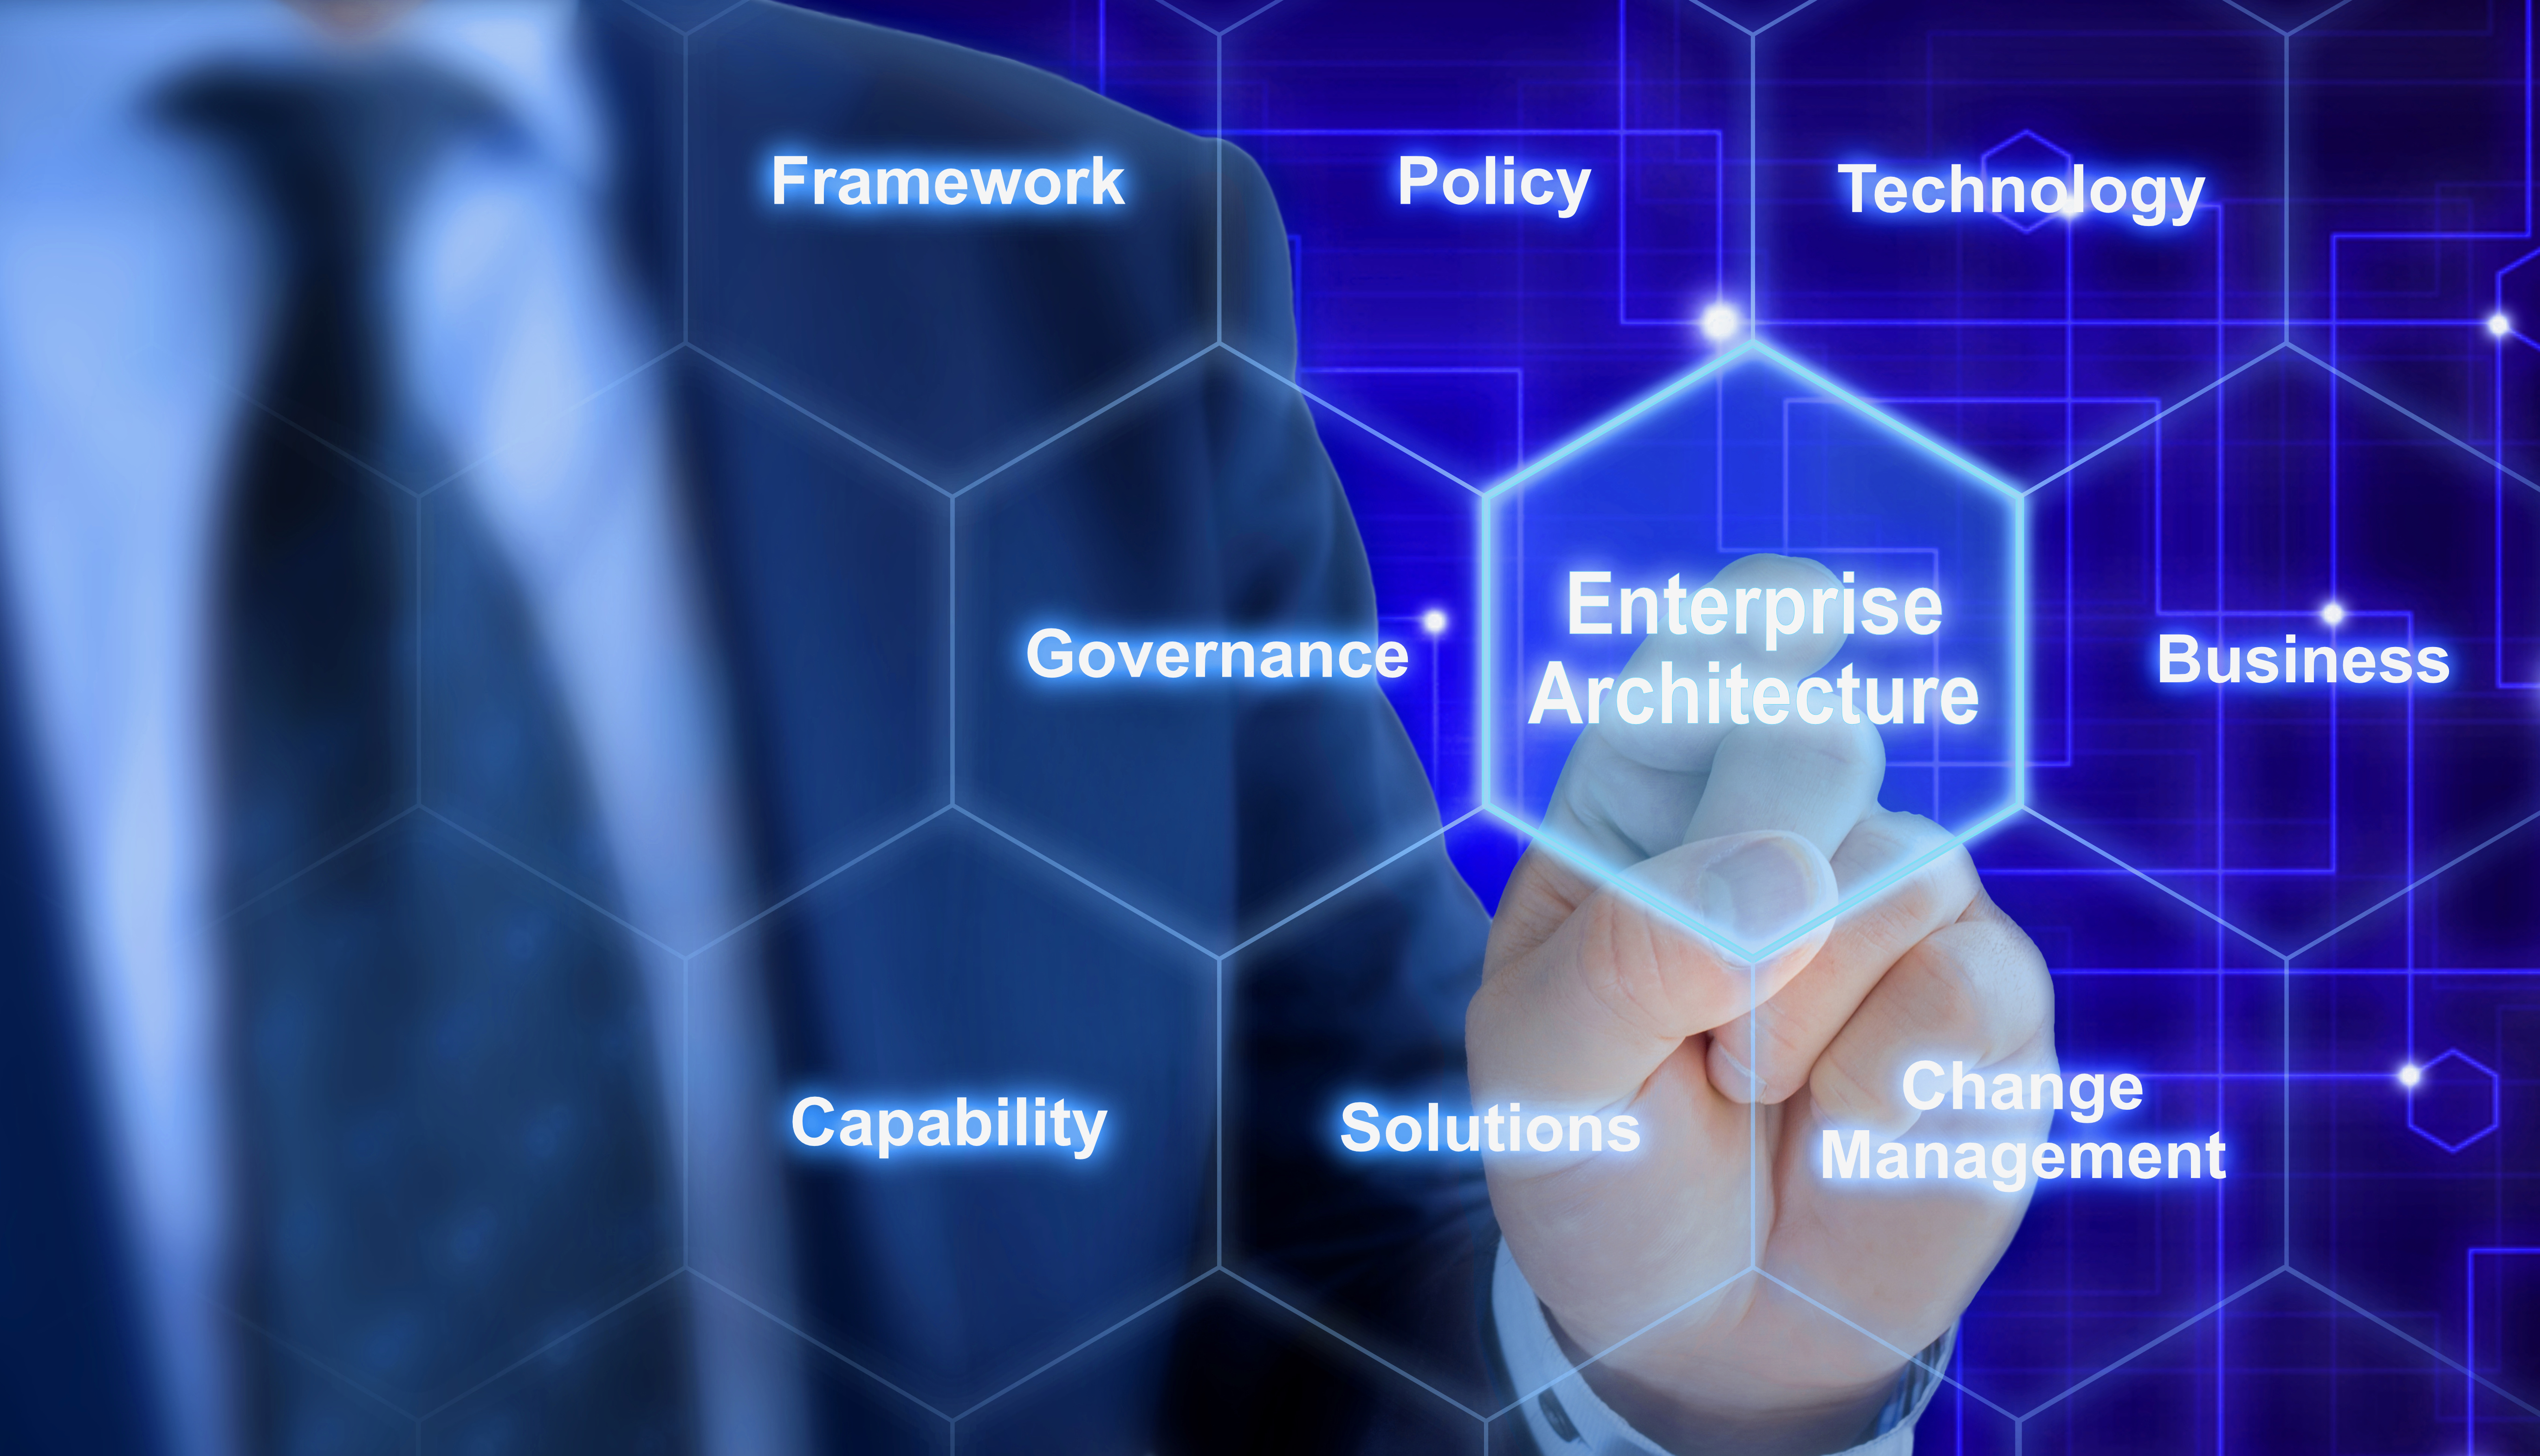 Making a difference in Africa through Enterprise Architecture